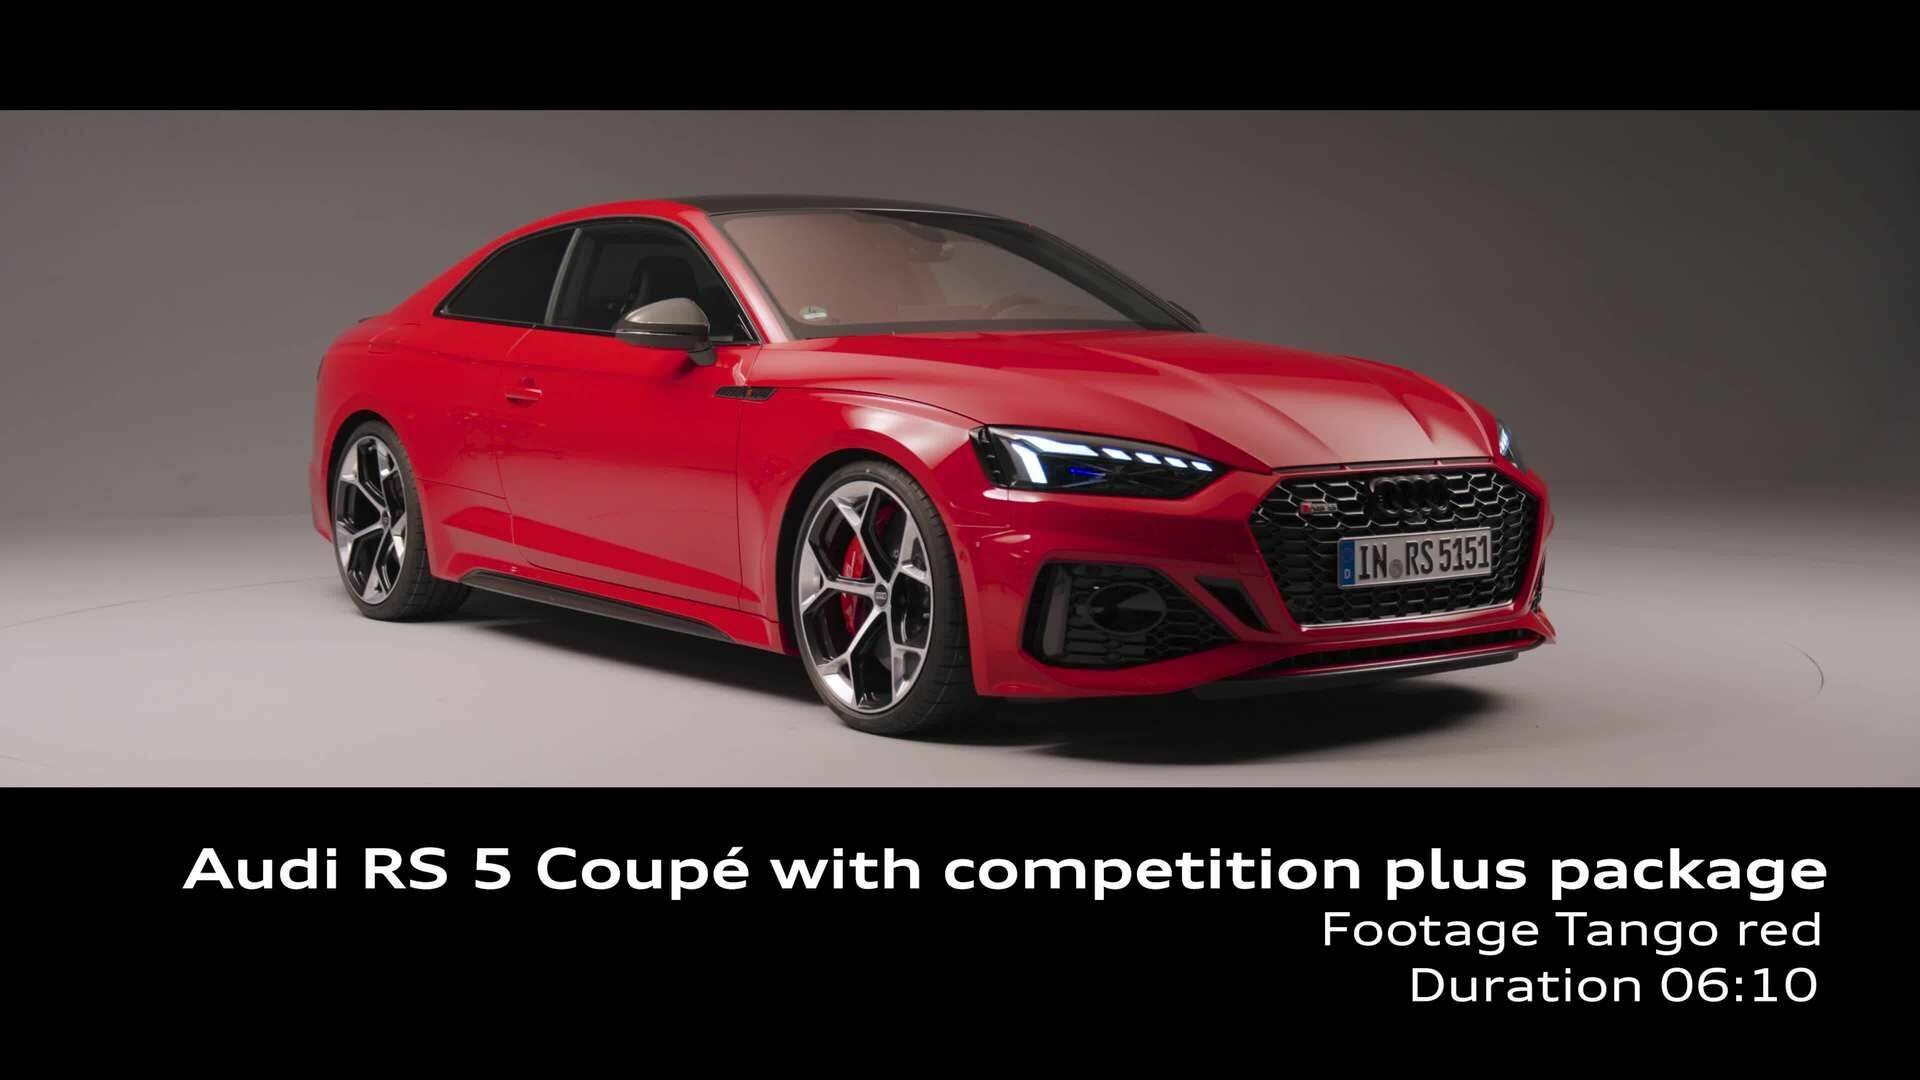 Studio Footage: Audi RS 5 Coupé with competition plus package